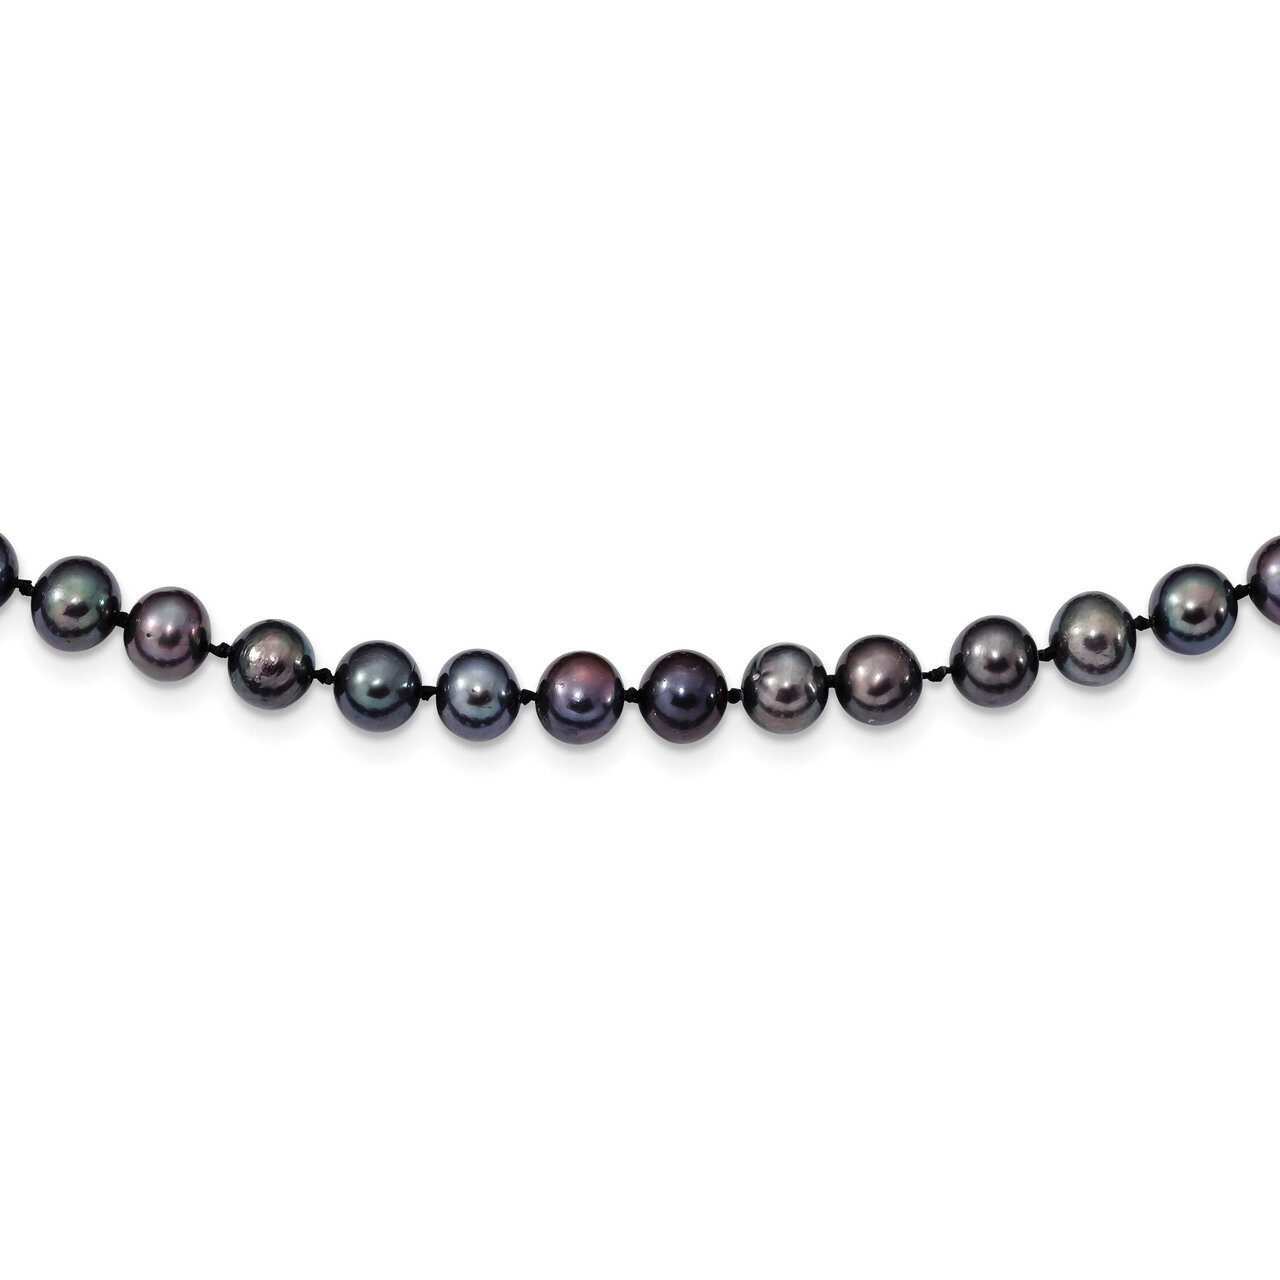 6-7mm Black Cultured Freshwater Pearl Necklace 16 Inch Sterling Silver Rhodium-plated QH5154-16